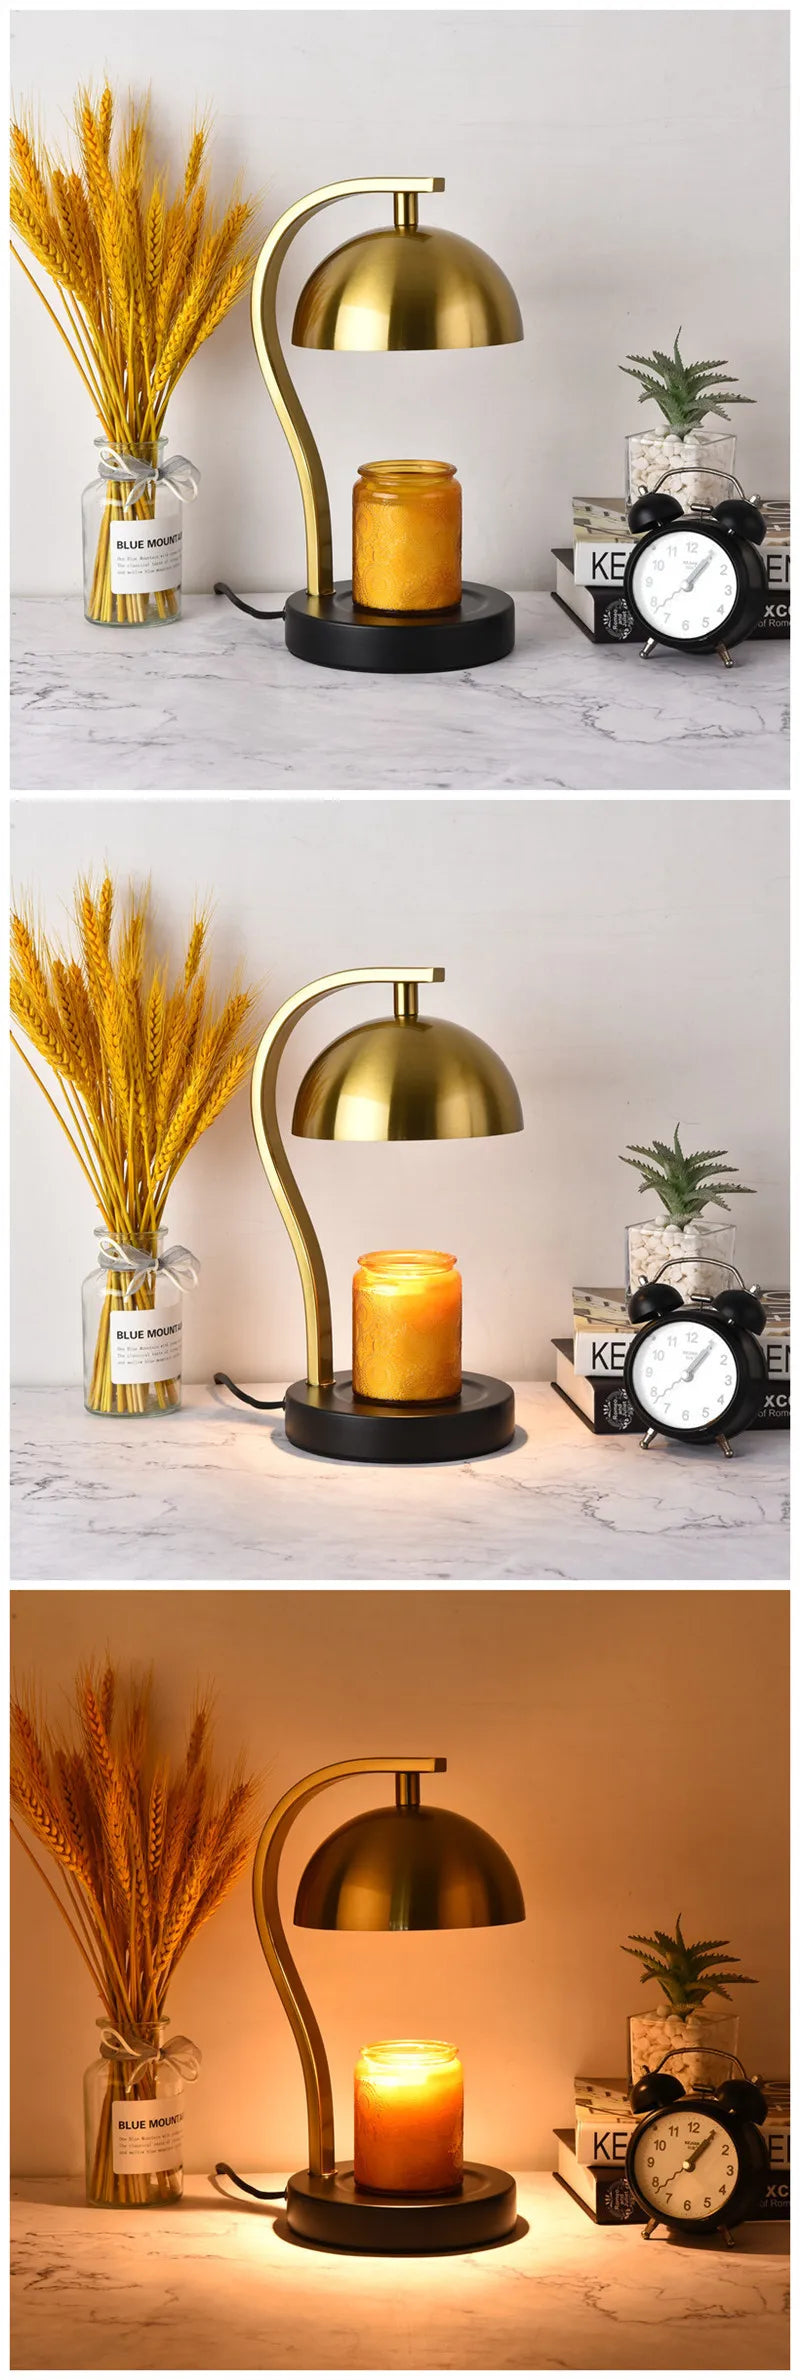 Golden Curved Bar Stand Retro Candle Warmer